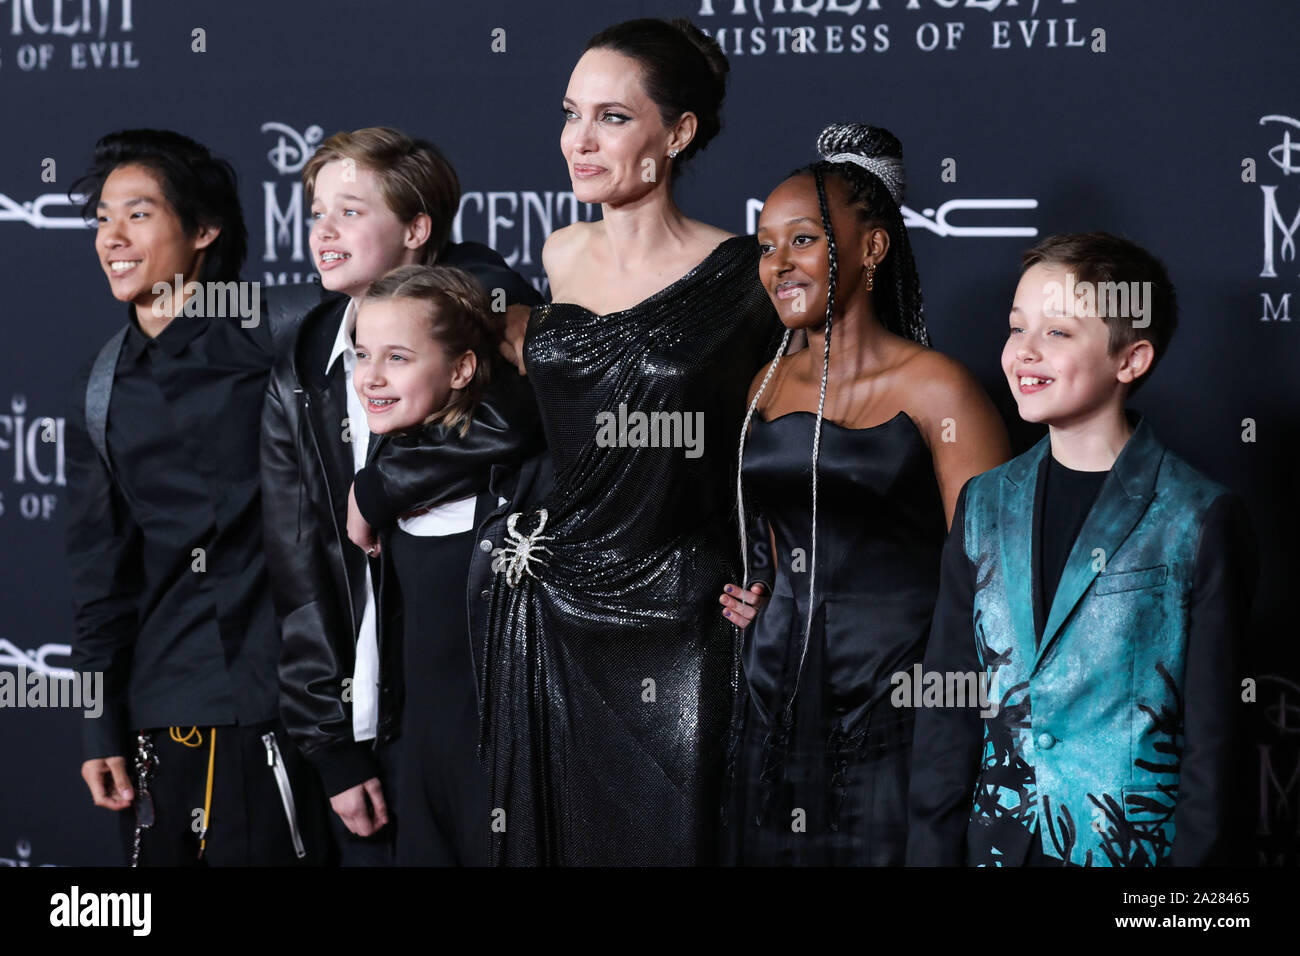 Hollywood, United States. 30th Sep, 2019. HOLLYWOOD, LOS ANGELES, CALIFORNIA, USA - SEPTEMBER 30: Pax Thien Jolie-Pitt, Shiloh Nouvel Jolie-Pitt, Vivienne Marcheline Jolie-Pitt, Angelina Jolie, Zahara Marley Jolie-Pitt and Knox Leon Jolie-Pitt arrive at the World Premiere Of Disney's 'Maleficent: Mistress Of Evil' held at the El Capitan Theatre on September 30, 2019 in Hollywood, Los Angeles, California, United States. (Photo by Xavier Collin/Image Press Agency) Credit: Image Press Agency/Alamy Live News Stock Photo